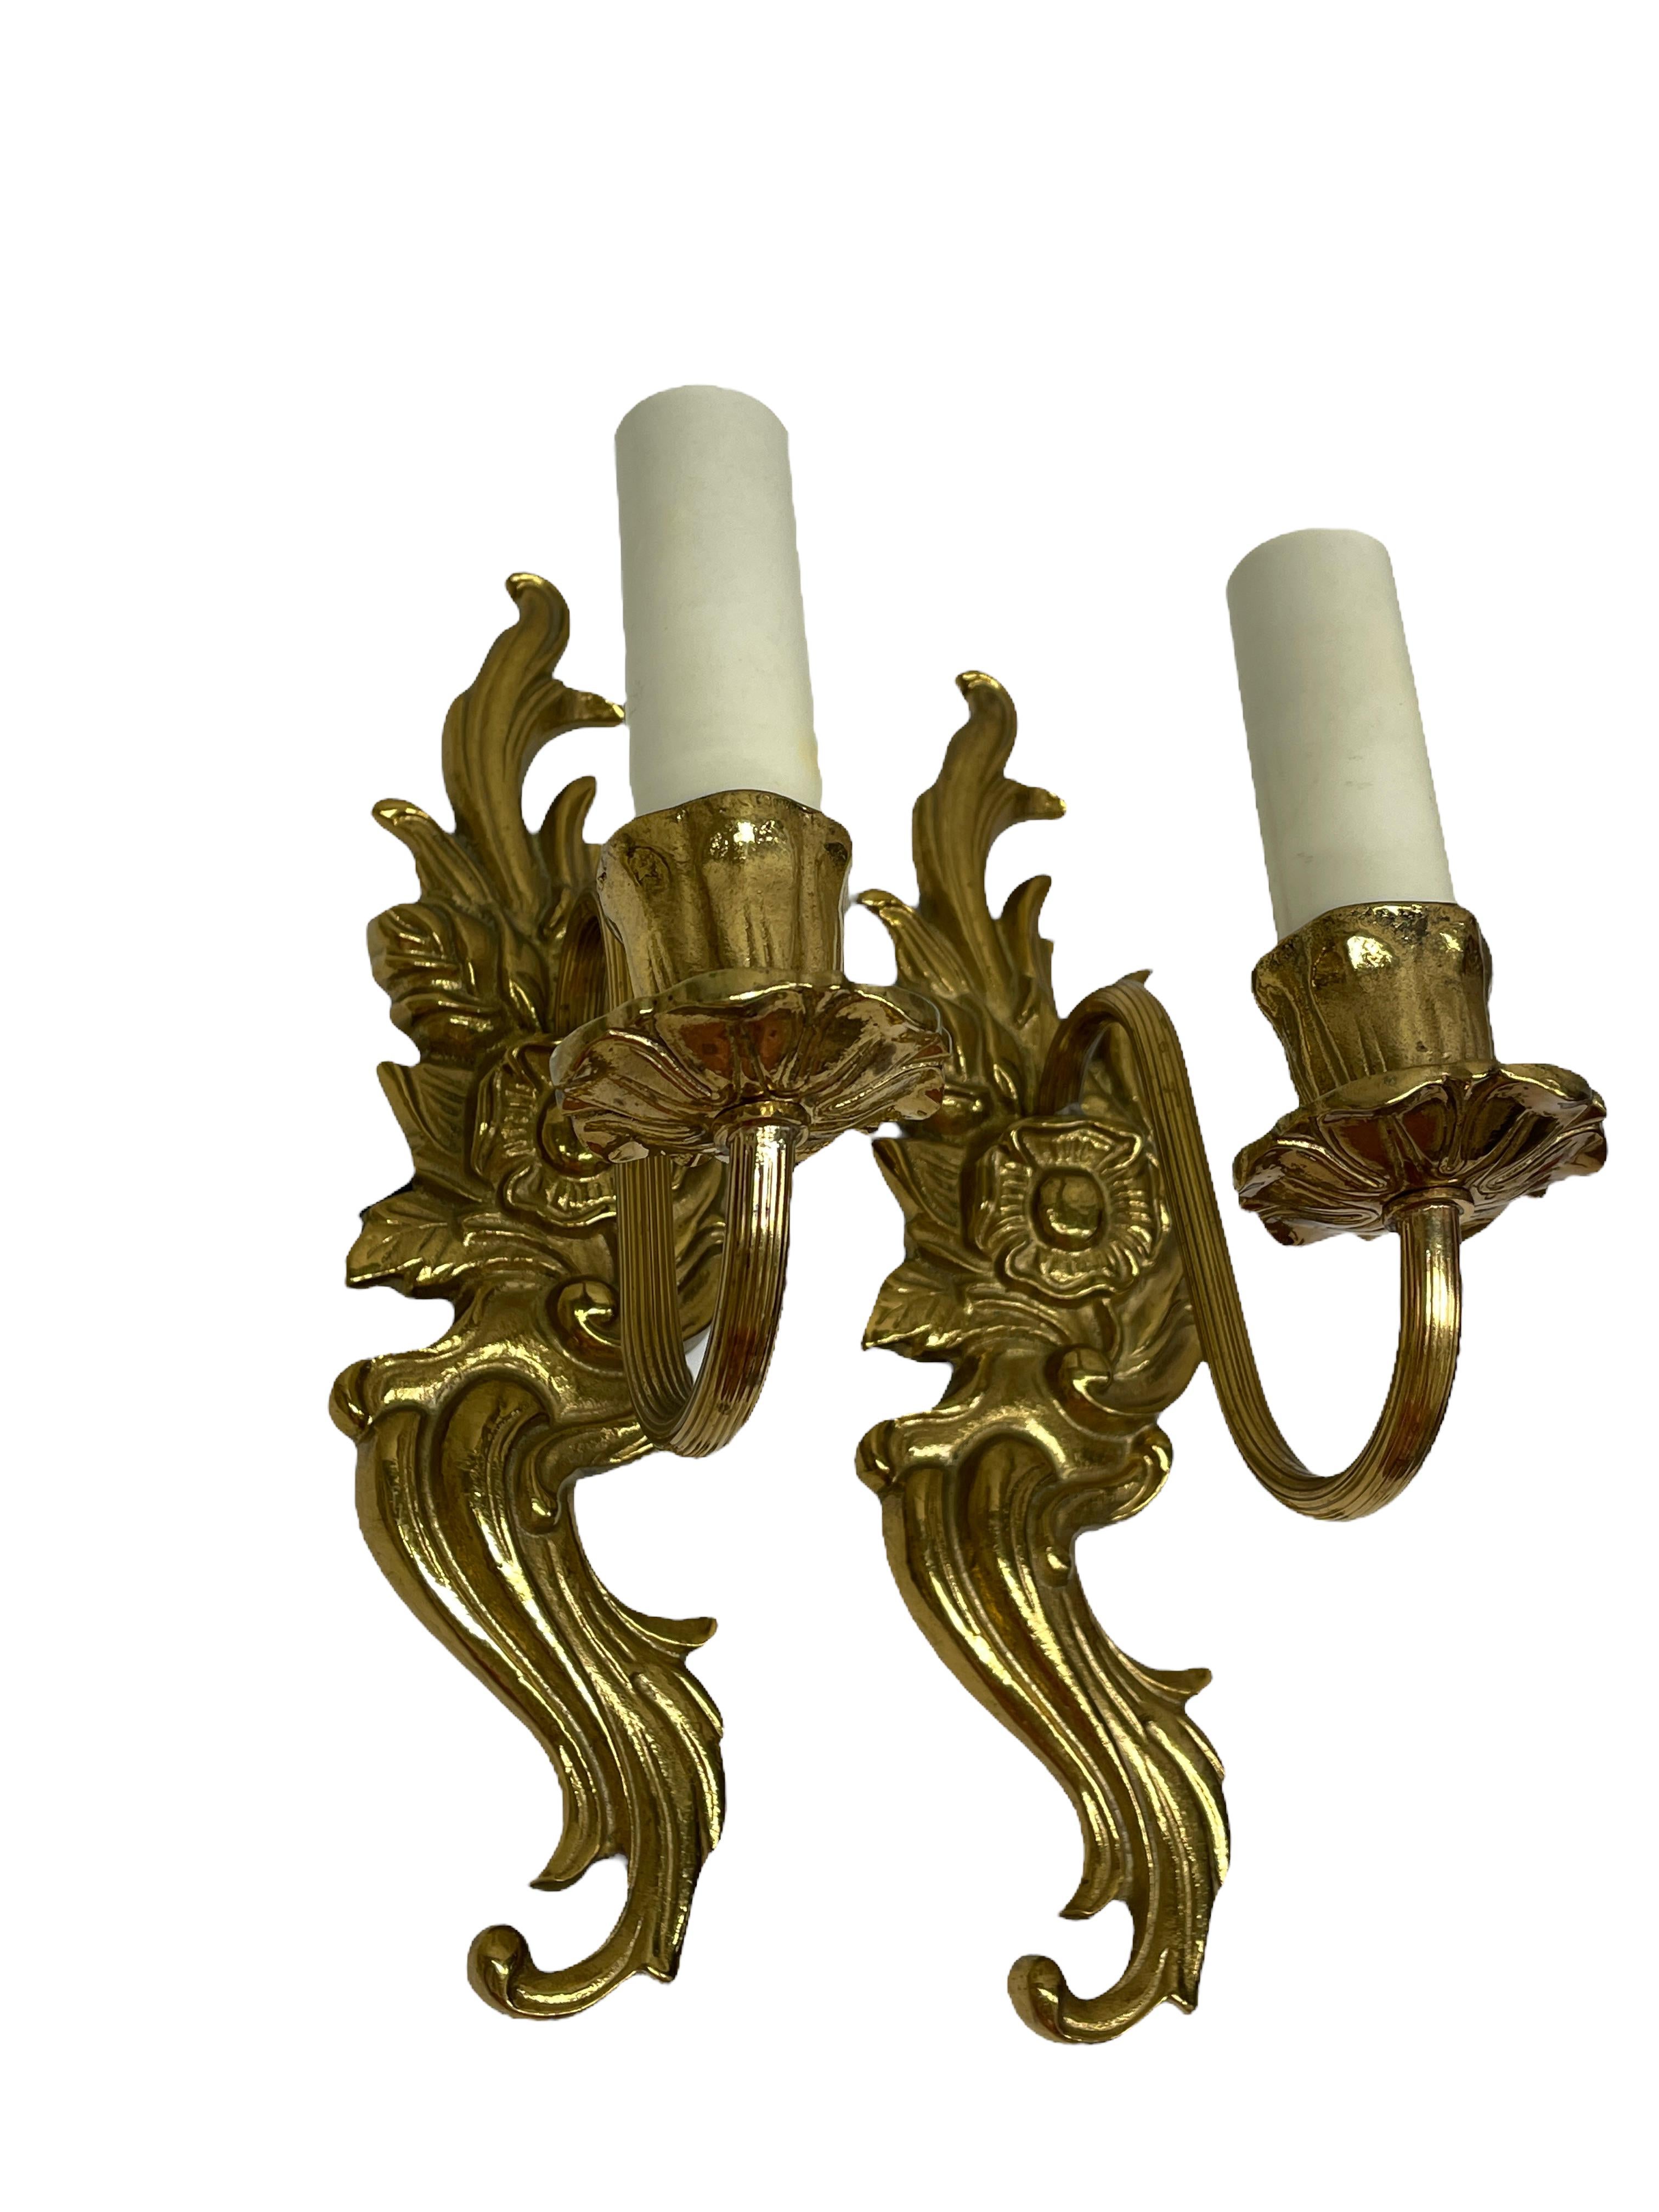 Hollywood Regency Pair of Wall Sconces in Bronze with Flower Leaf Motif, Sweden, 1960s For Sale